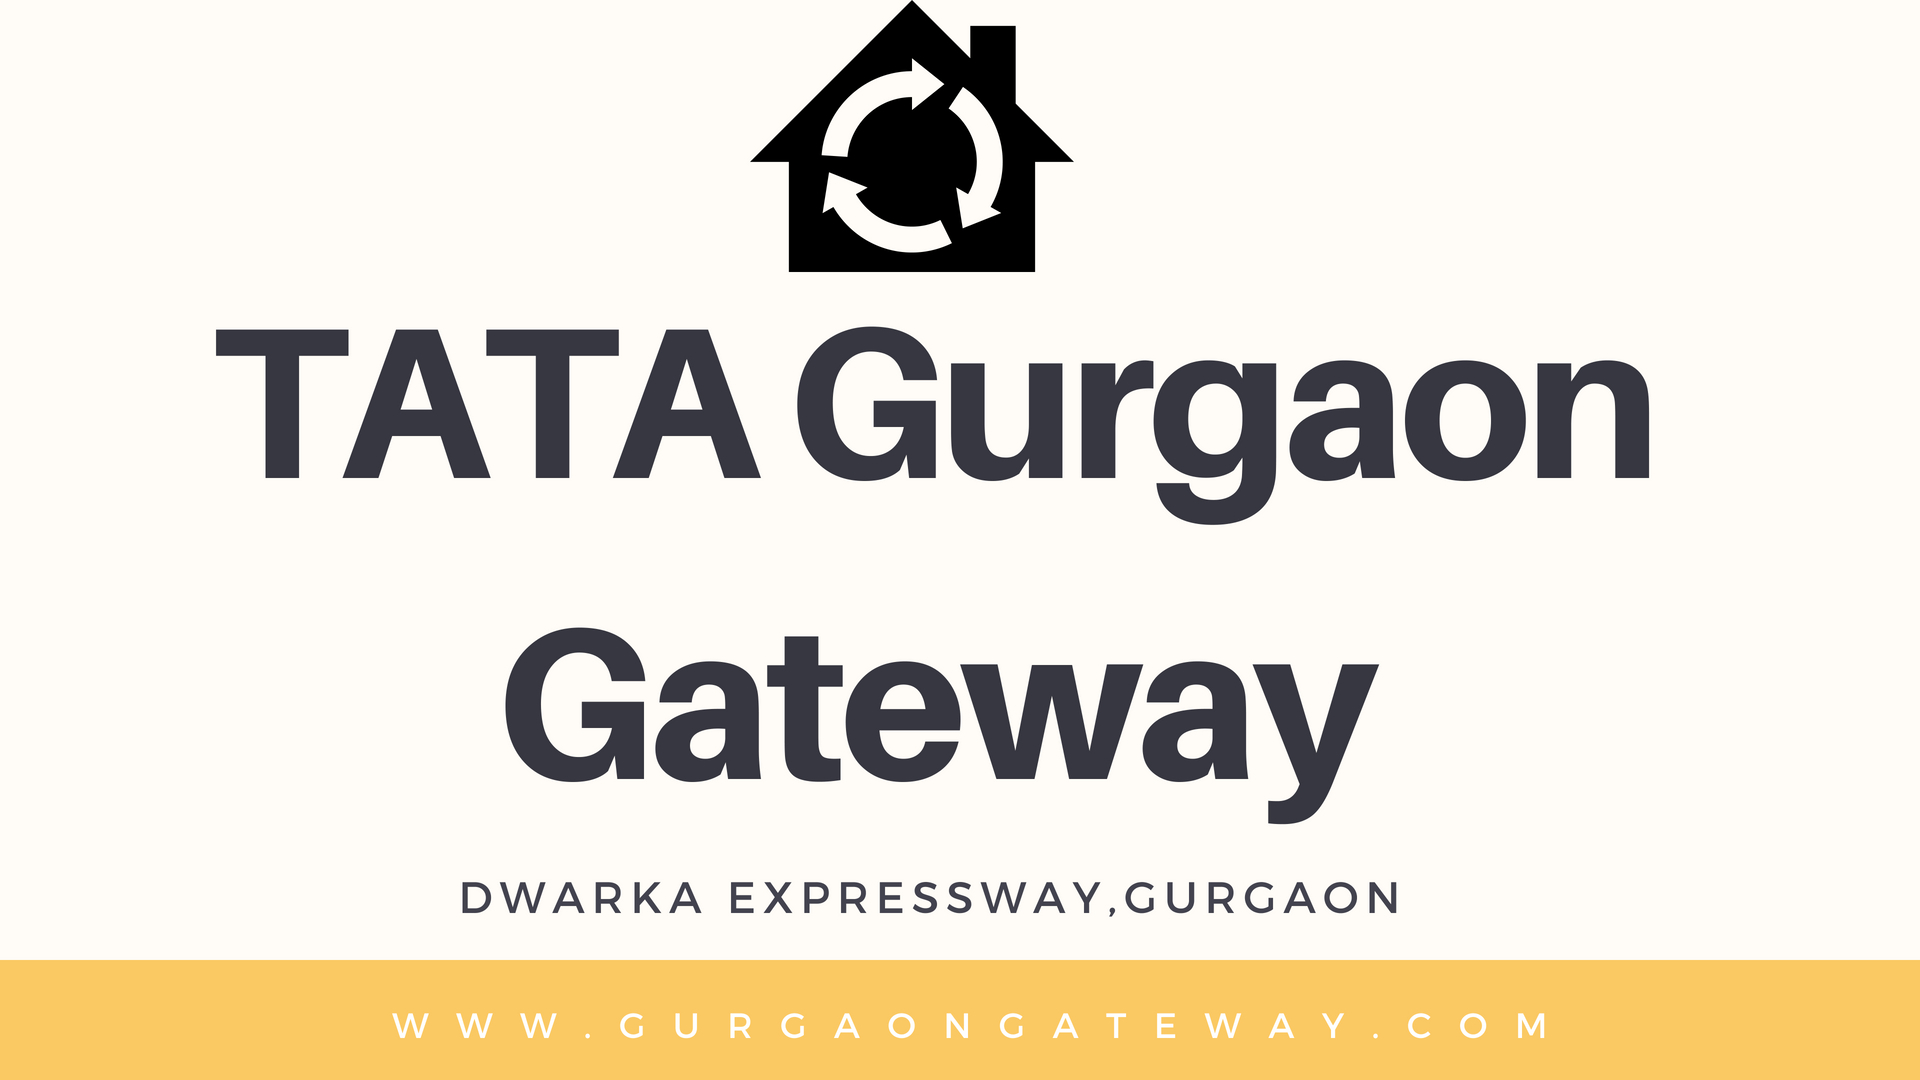 Tata Gurgaon Gateway 2bhk Apartments in Affordable Prices